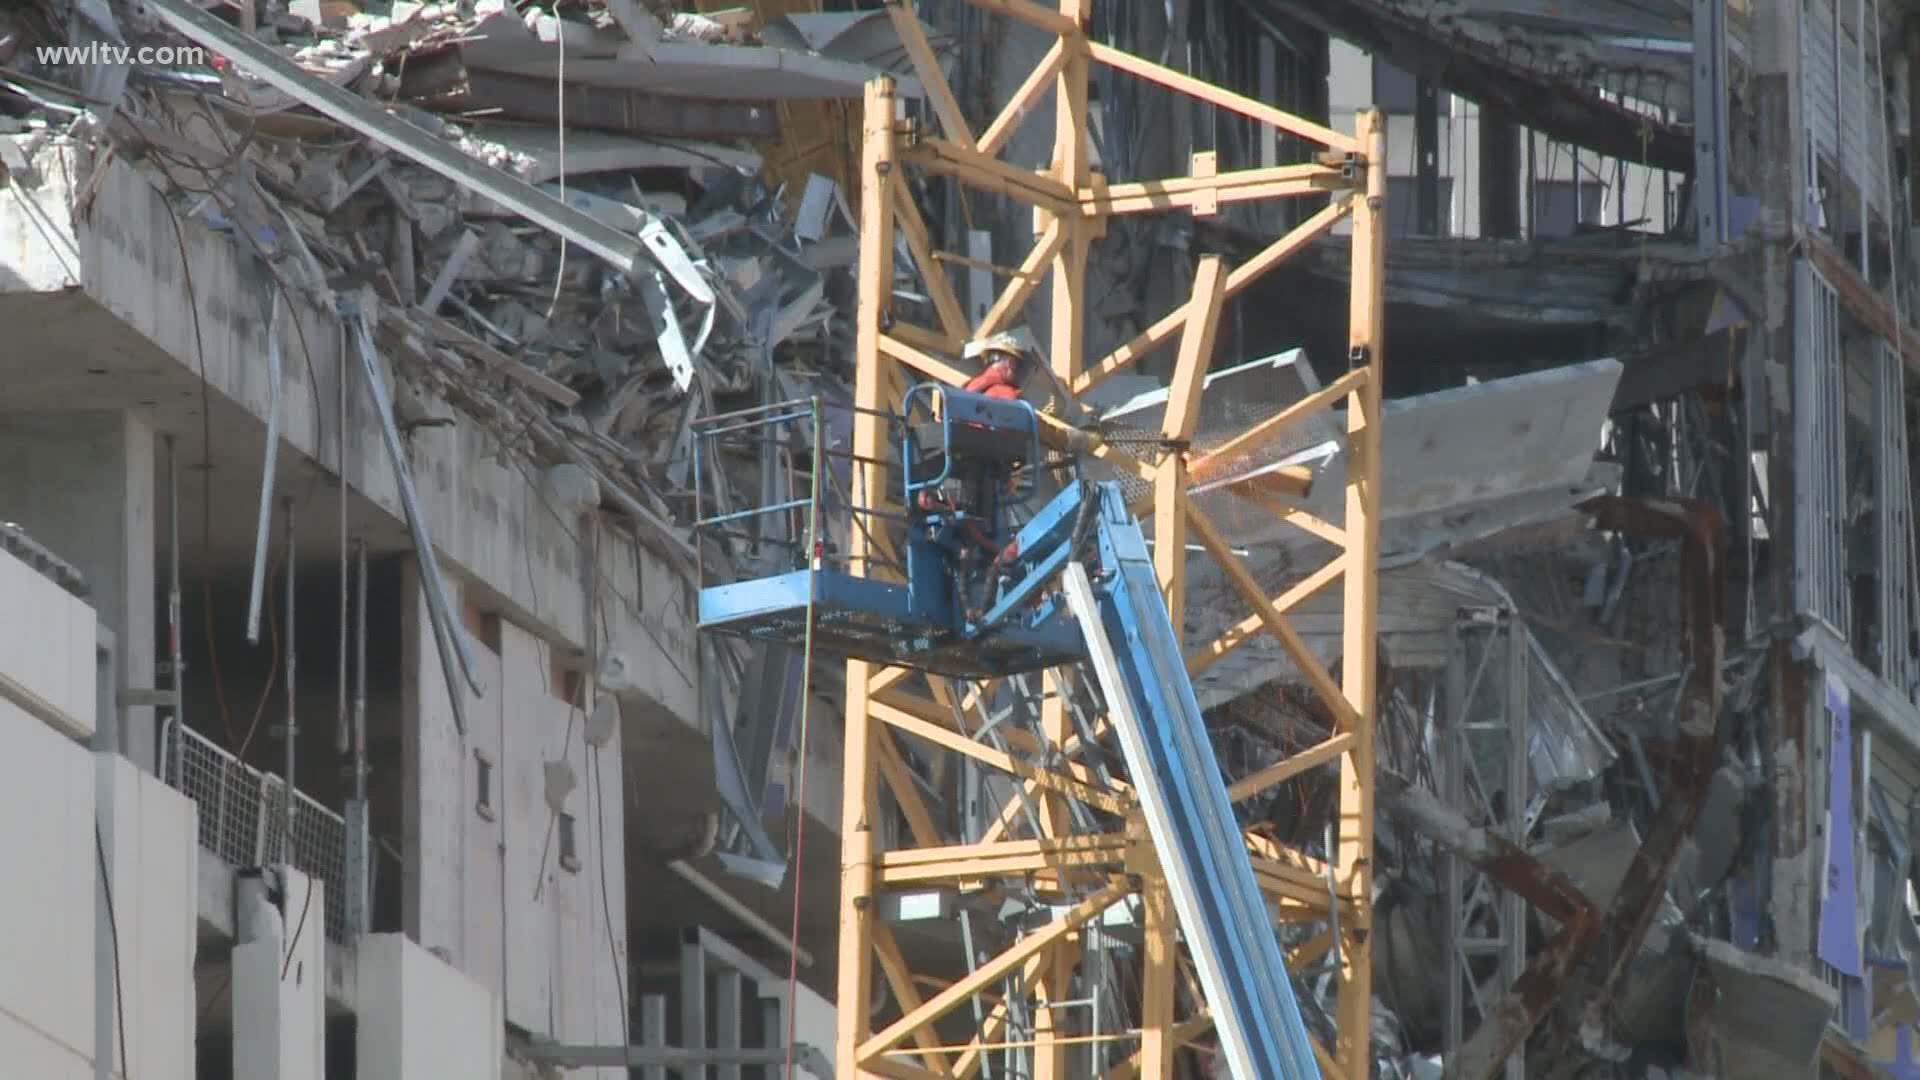 Hard Rock demolition continues on schedule, workers slice into crane impaling Rampart St.